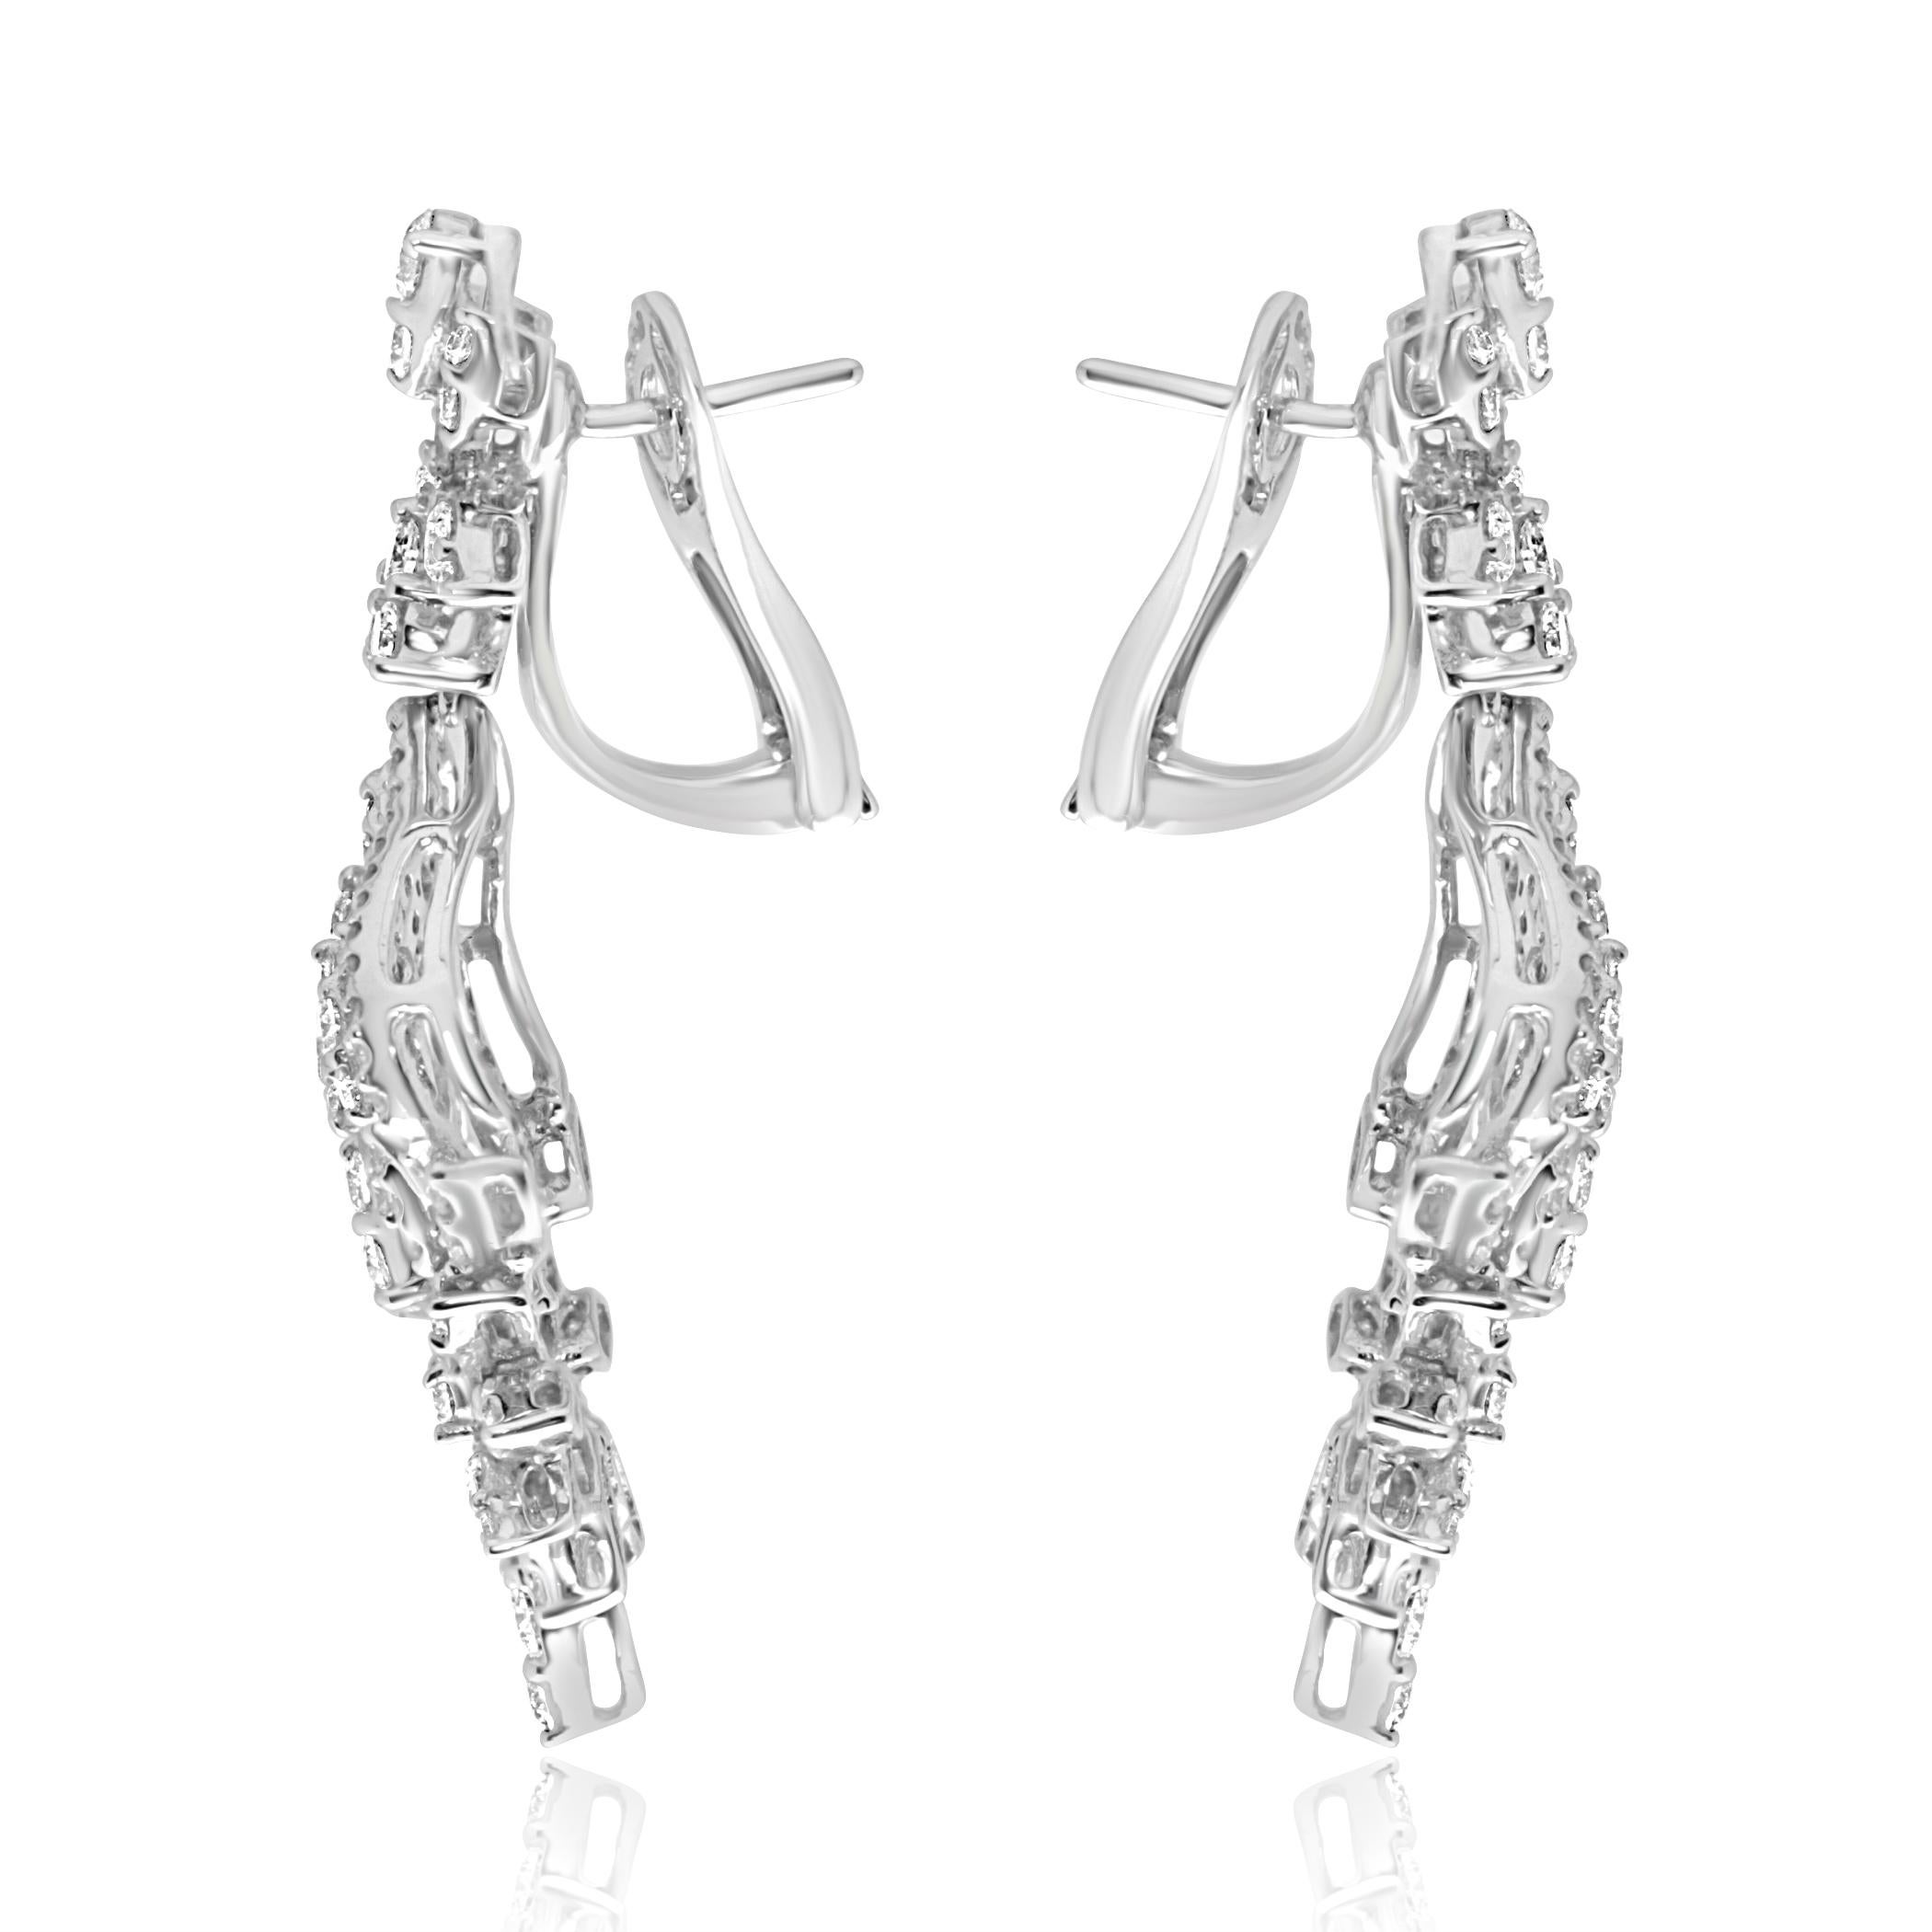 light up your look with this amazing pair of earrings!
they'll sure make a standout addition to your collection.
made of 18kt white gold , weighing 12 grams and set with beautiful bright brilliant cut diamonds of 3.70ct in total.
omega back clip.
